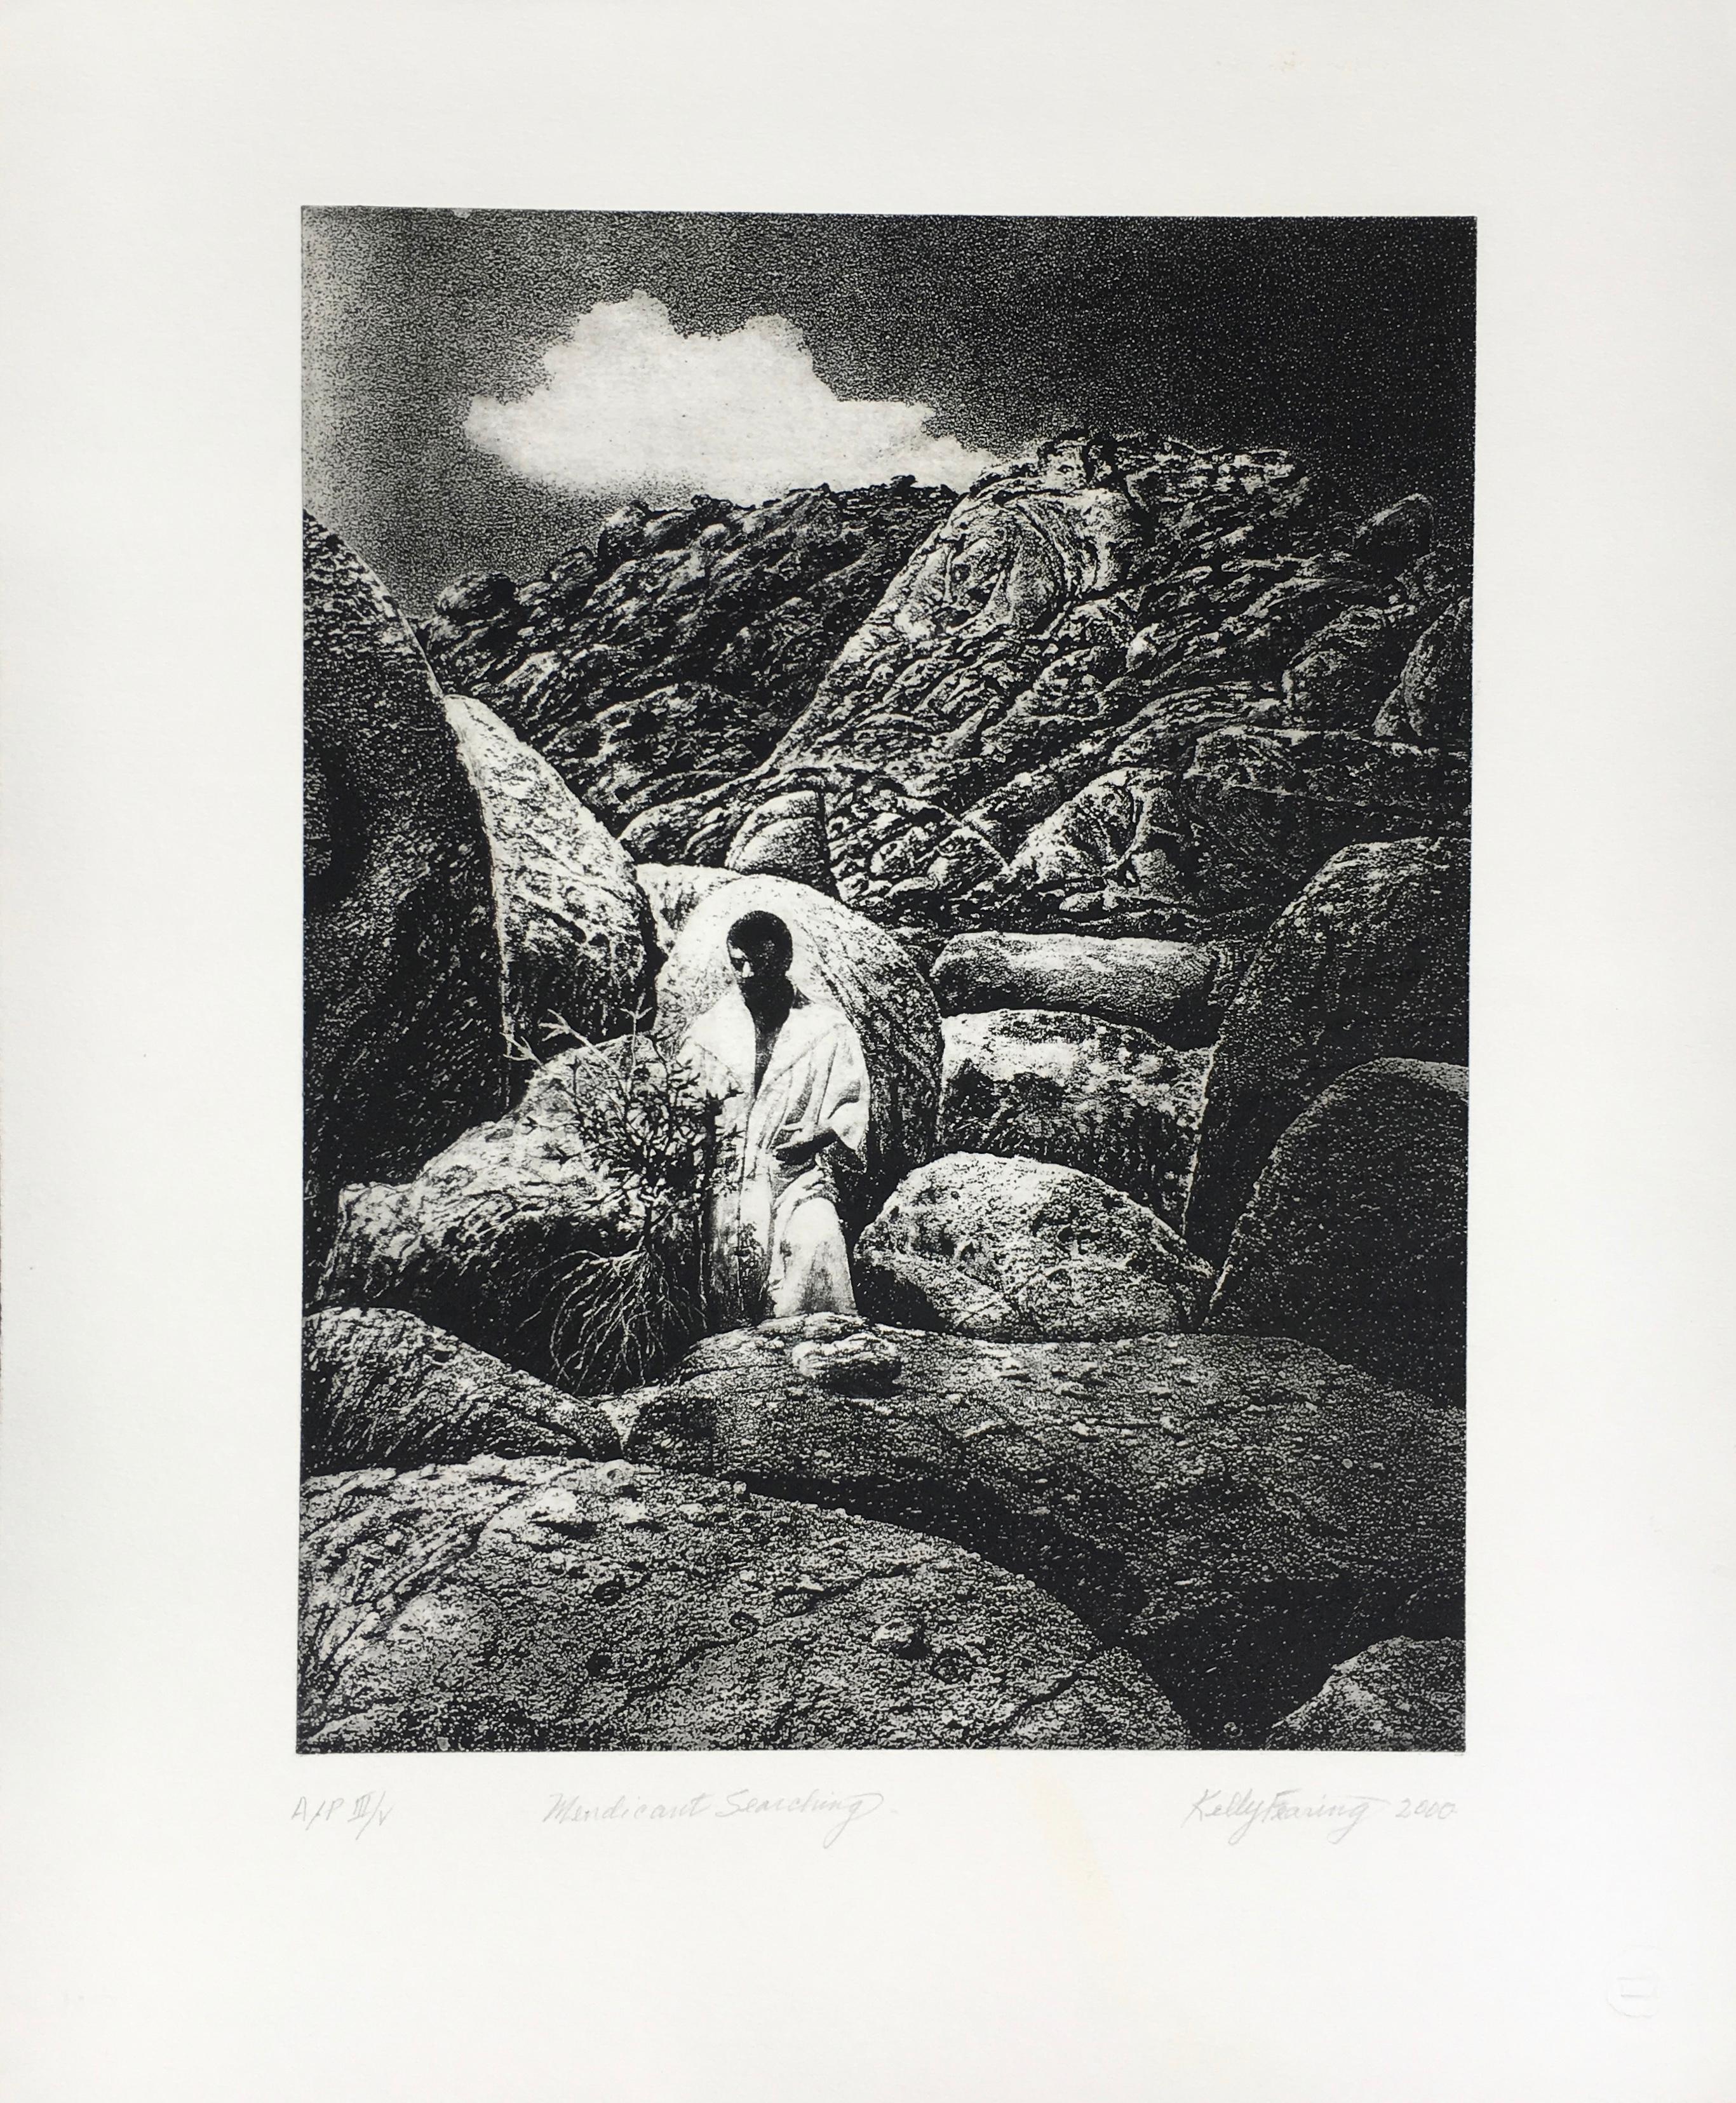 Kelly Fearing (American, 1918 - 2011)

Title:            Mendicant Searching, 2000
Medium:      Prints and multiples, etching
Edition:        3 / 5
Size:            13 x 10 in. (33 x 25.4 cm.)
Movement: Contemporary Art
Markings:    signed and dated